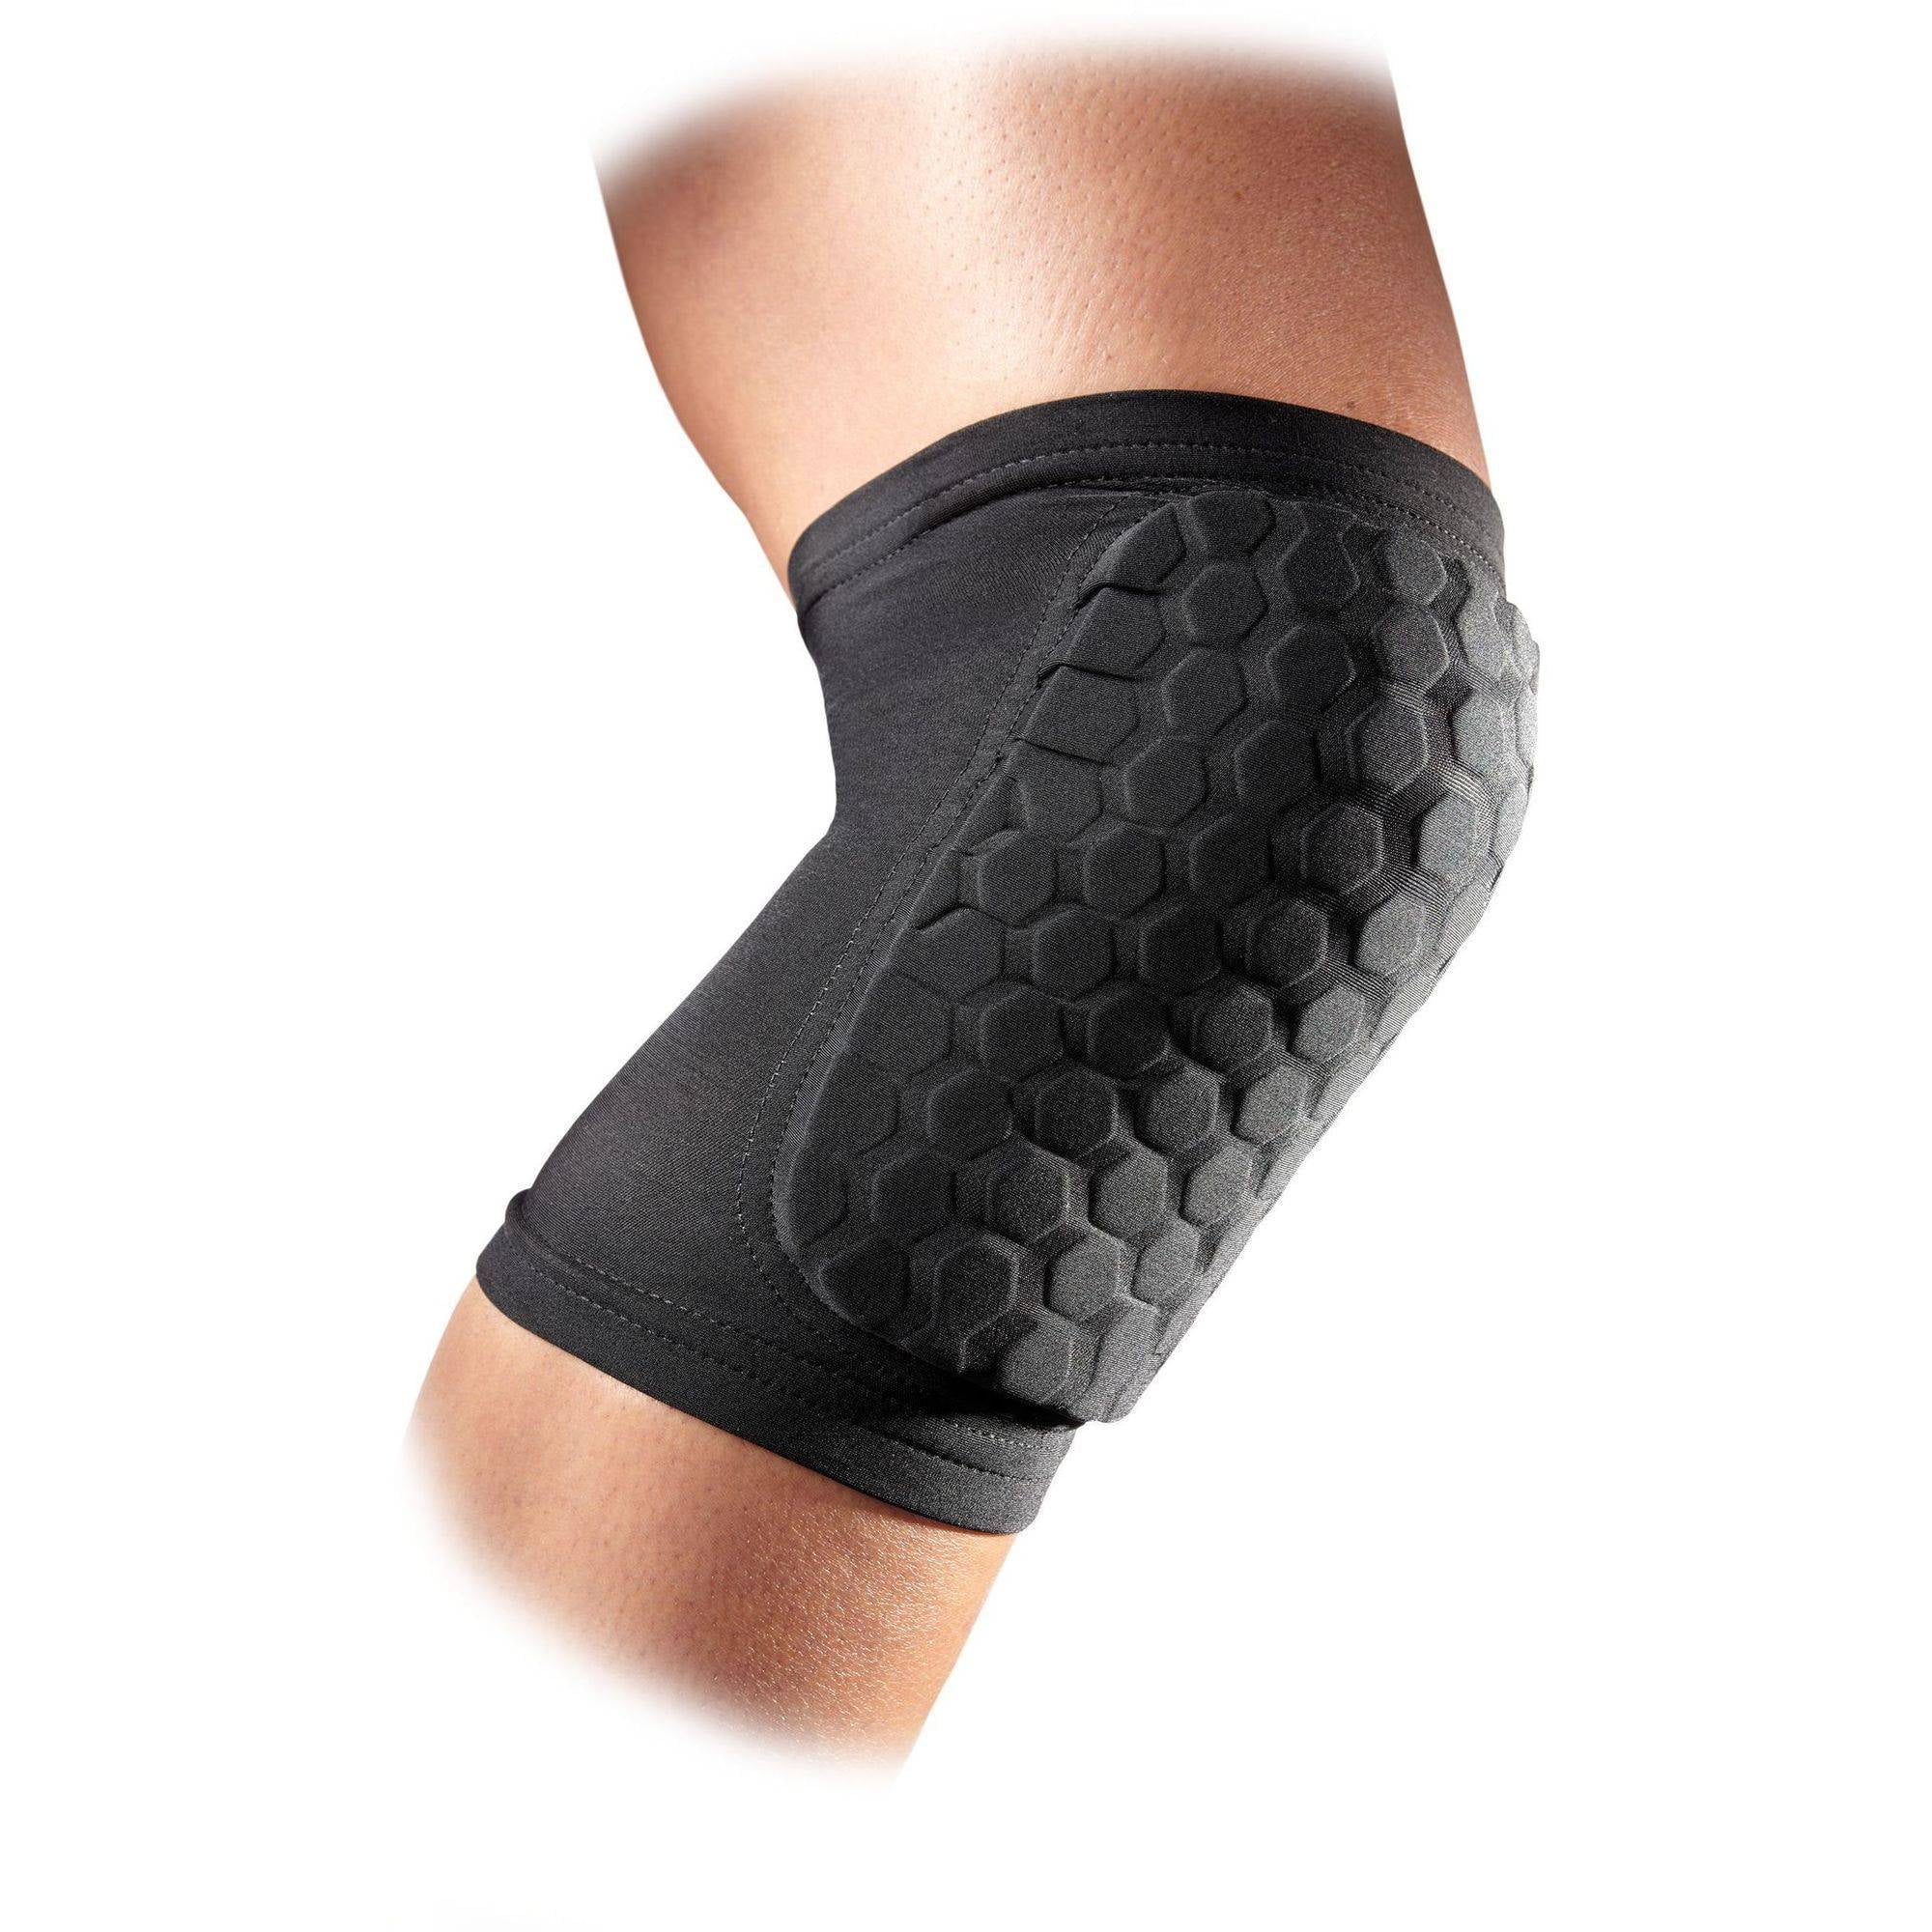 New All Sports Volleyball Knee Deluxe Elbow Pads Black one pair foam M,S or XS 